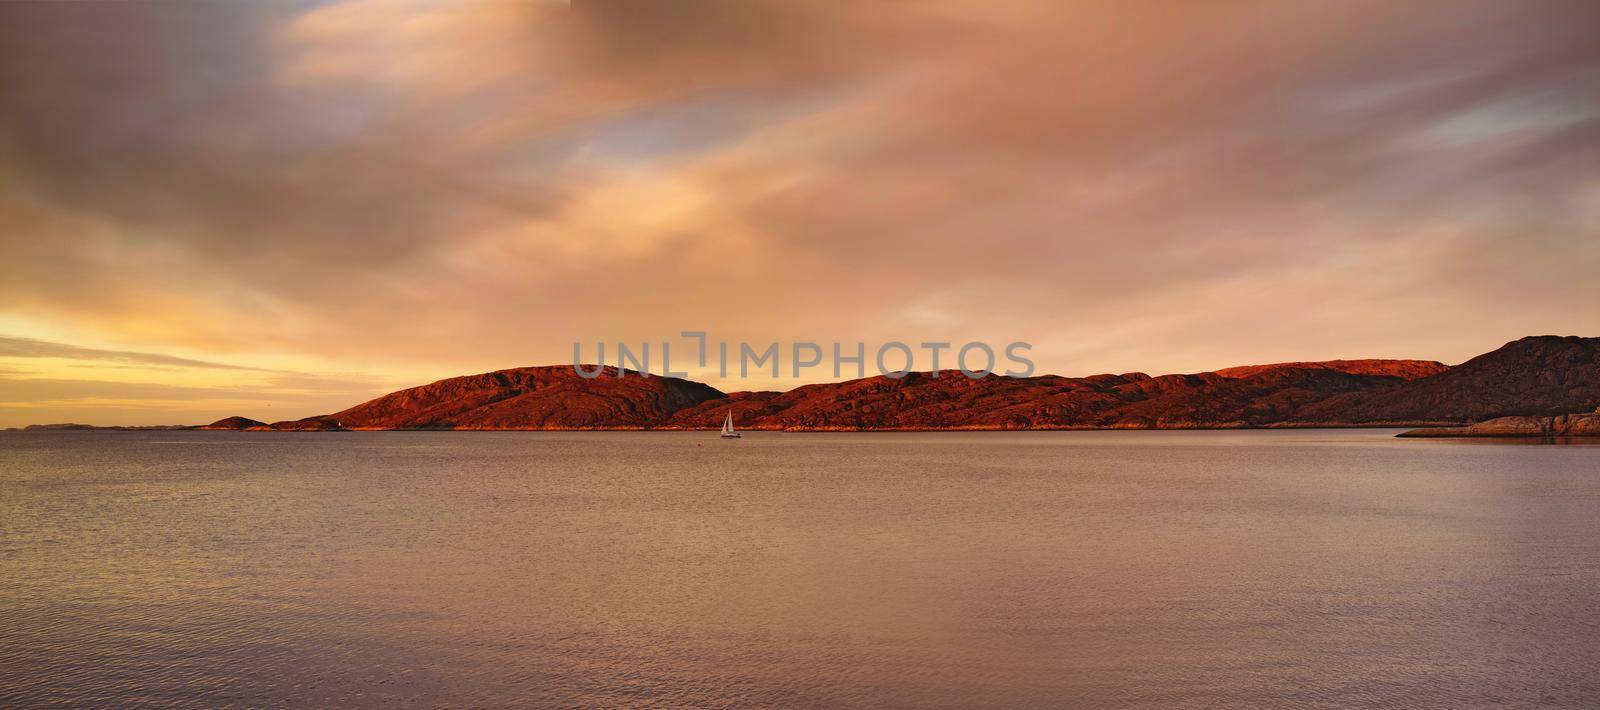 Distant sea landscape near a mountain with a small sailboat in the water. The ocean, beach, or large lake with a boat in the distance near a hill outdoors during sunset on a cloudy day by YuriArcurs